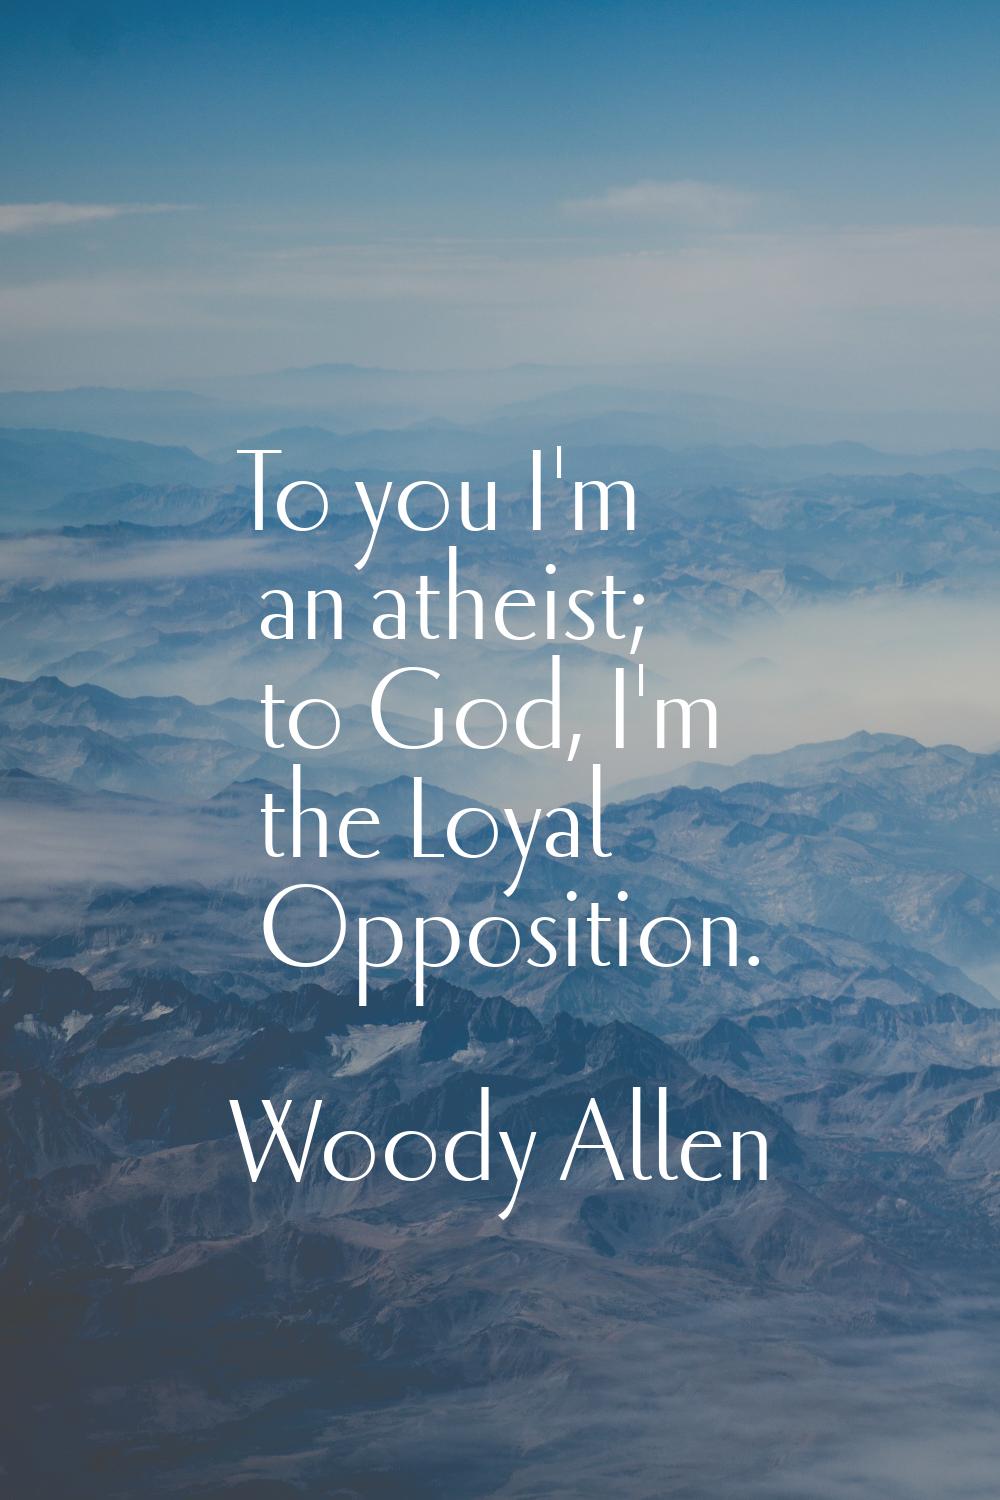 To you I'm an atheist; to God, I'm the Loyal Opposition.